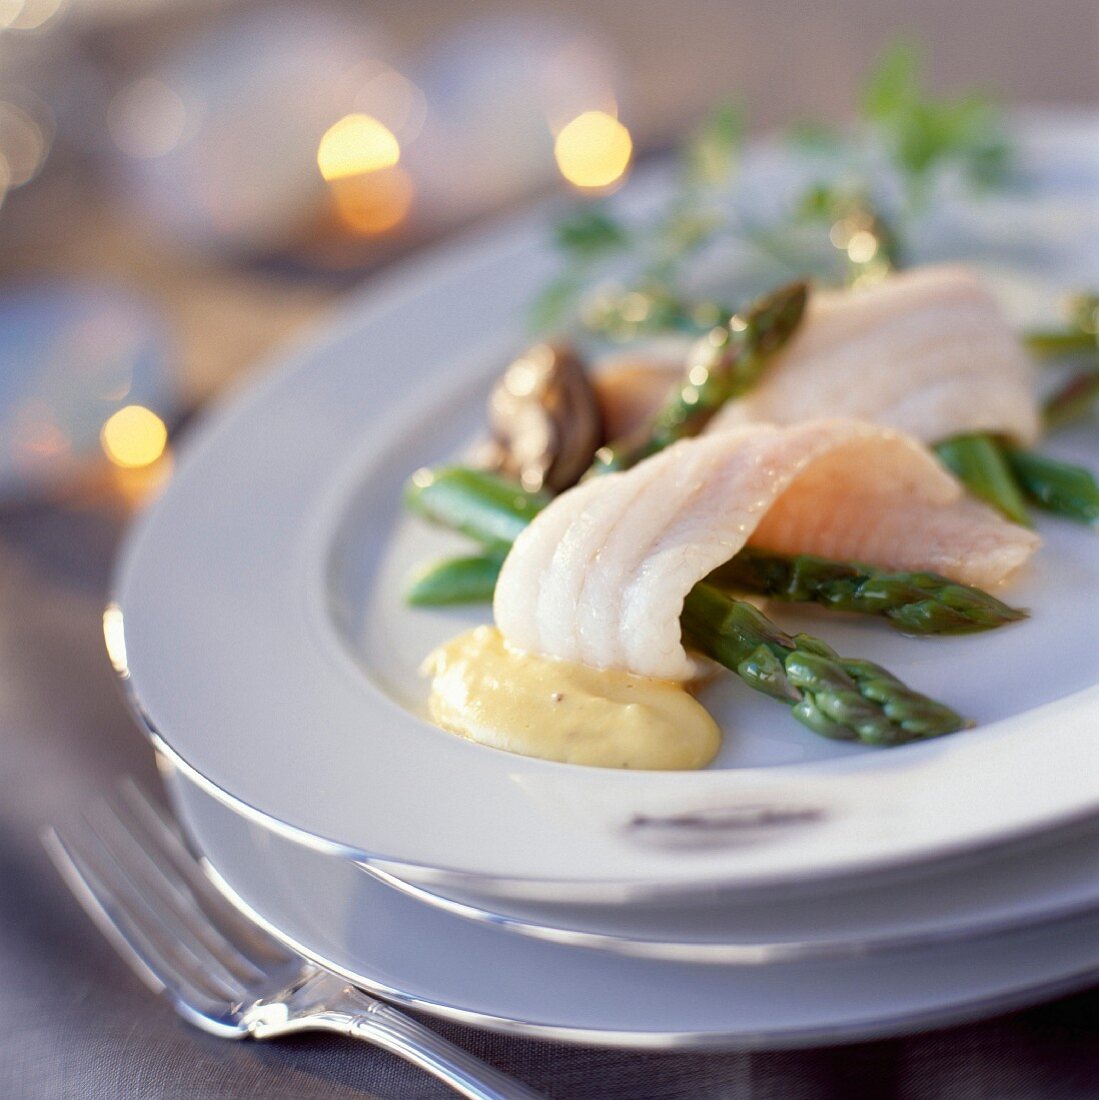 Fillets of sole with oysters and asparagus